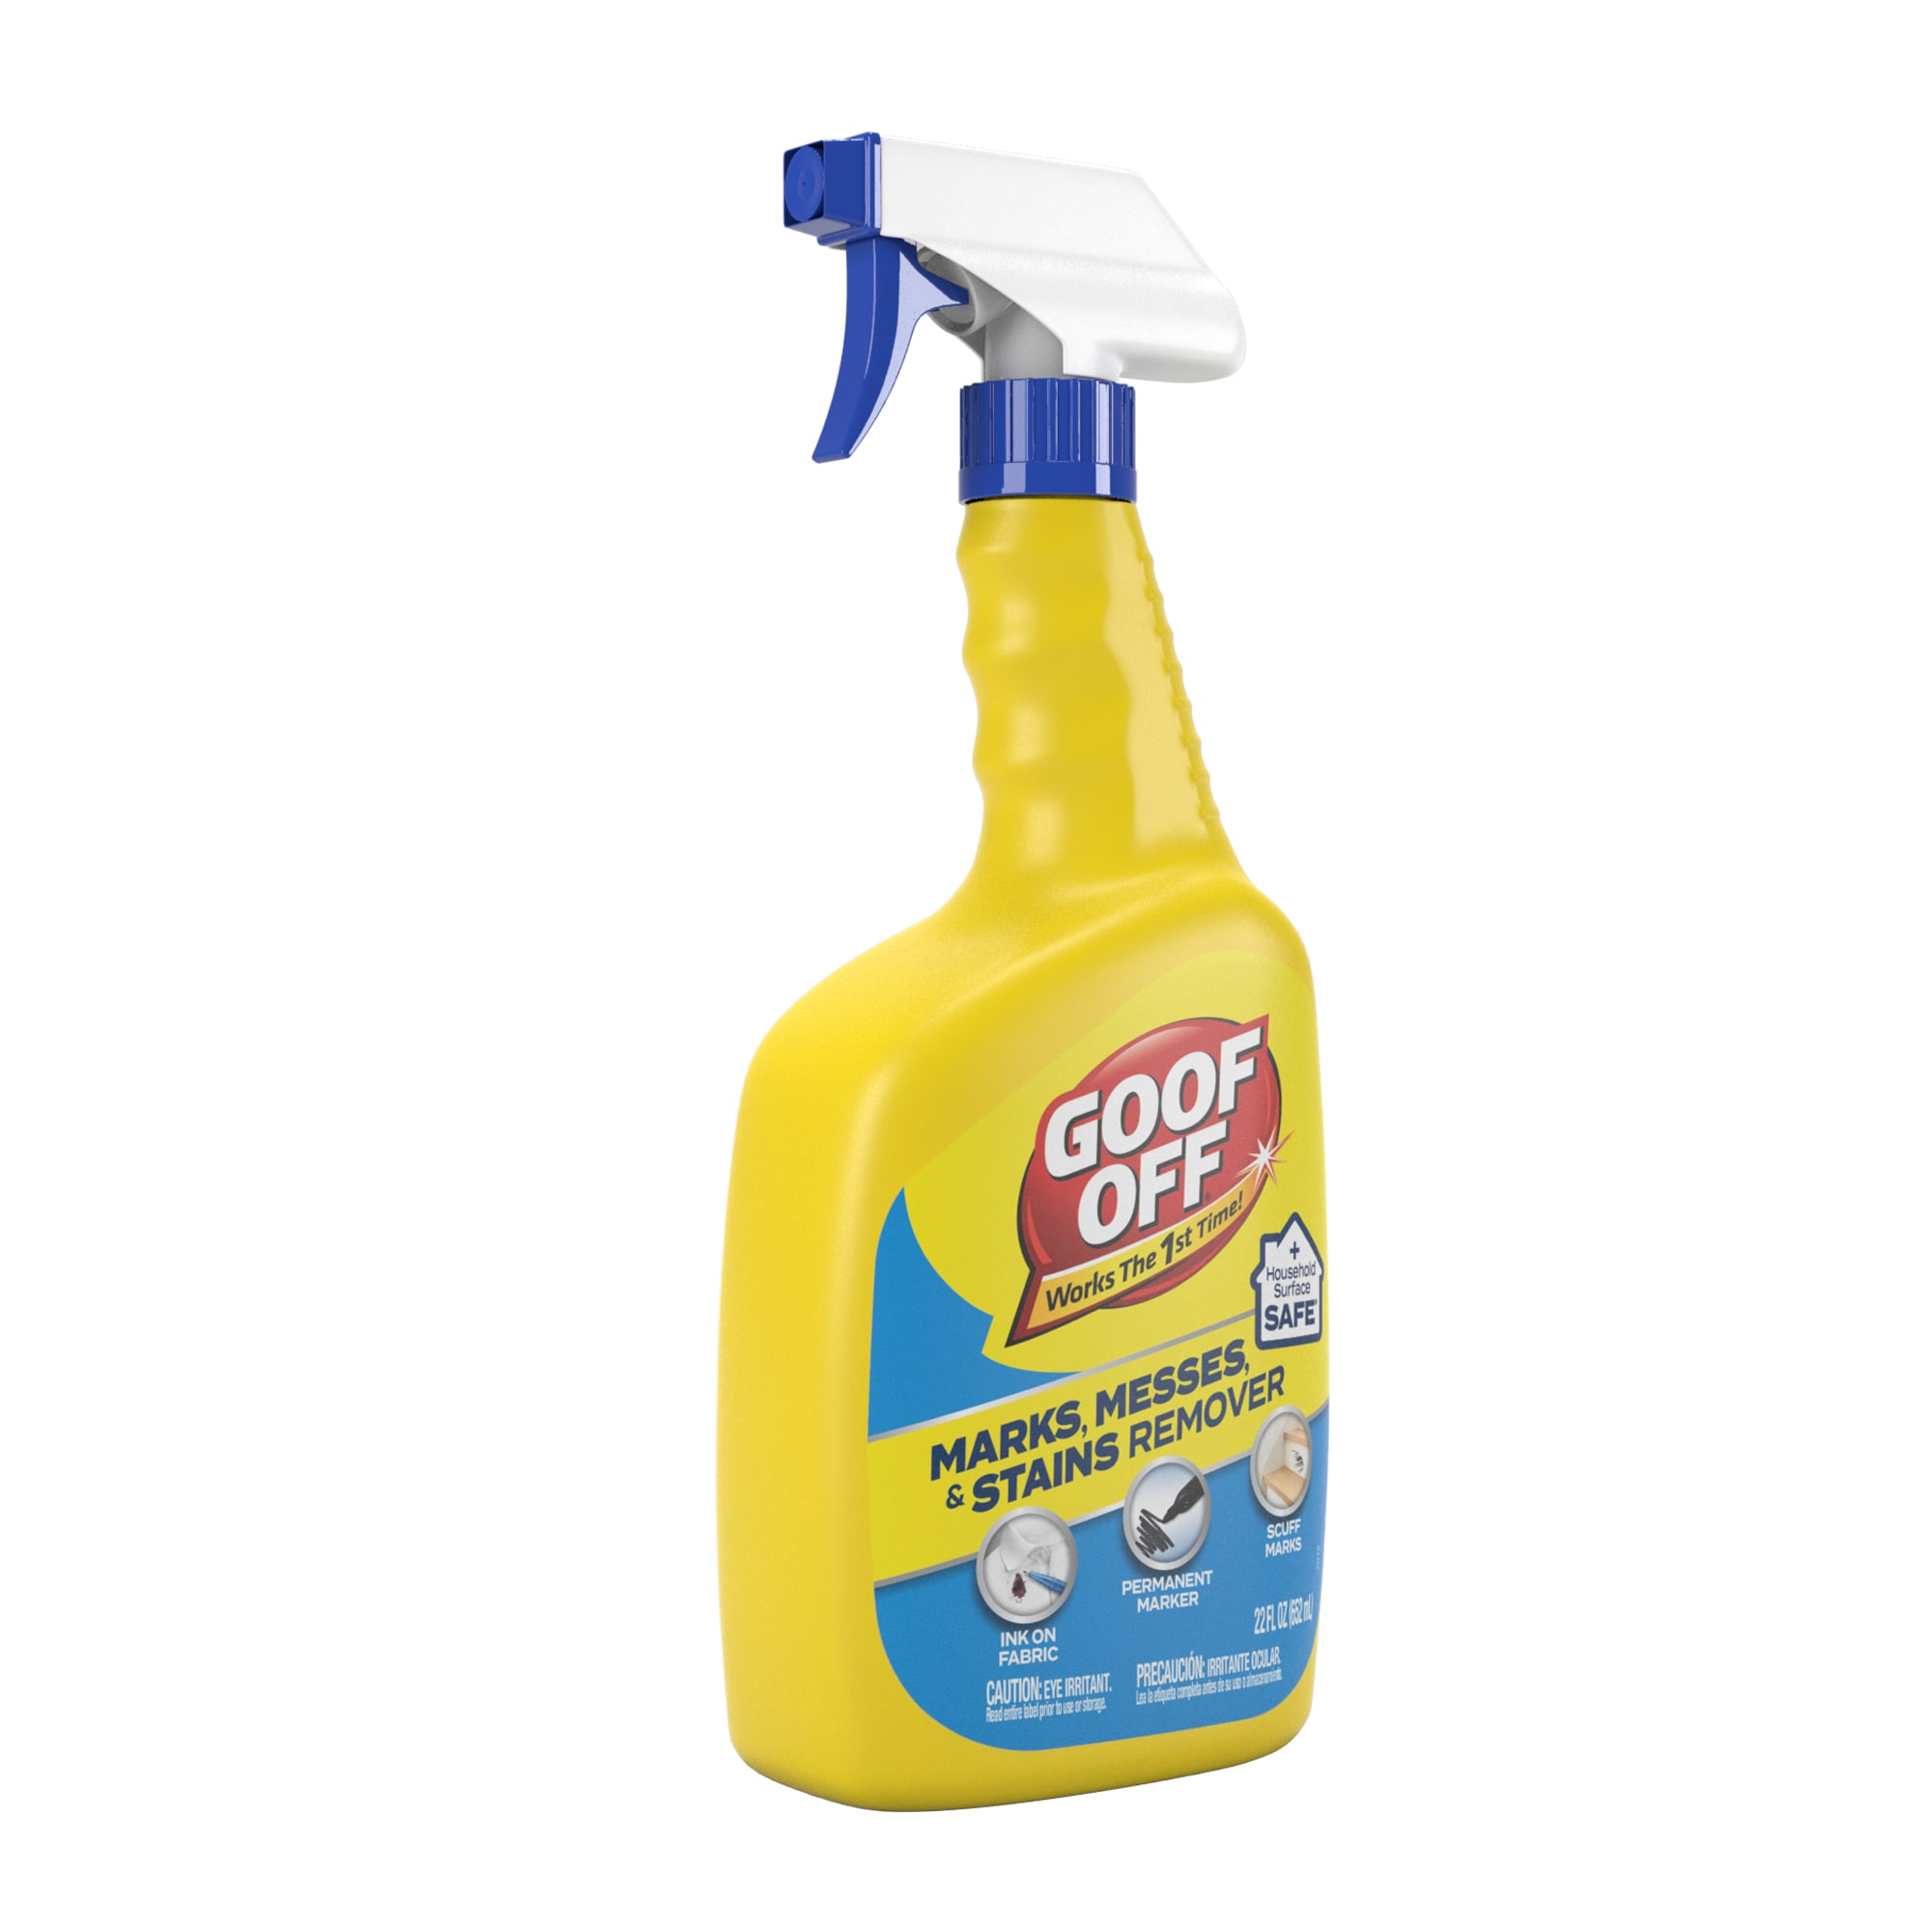 Goof Off Concrete Cleaner and Oil Stain Remover - 32 oz. Bottle 